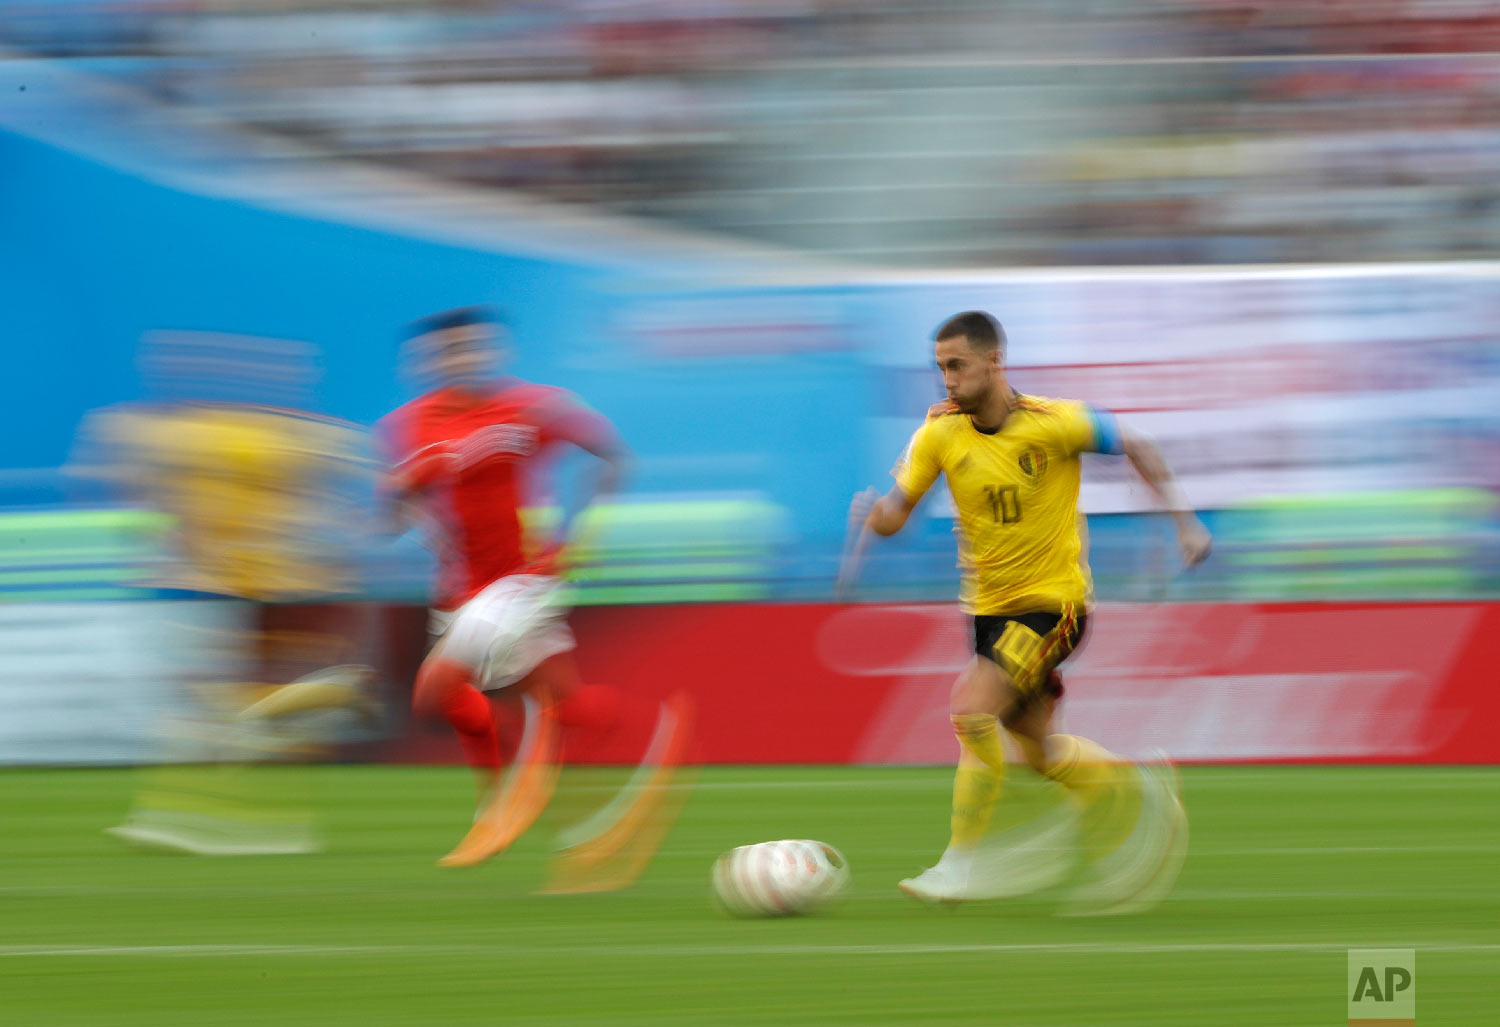  Belgium's Eden Hazard, right, is pursued by England's Jesse Lingard as he runs with the ball during the third place match between England and Belgium at the 2018 soccer World Cup in the St. Petersburg Stadium in St. Petersburg, Russia, Saturday, Jul